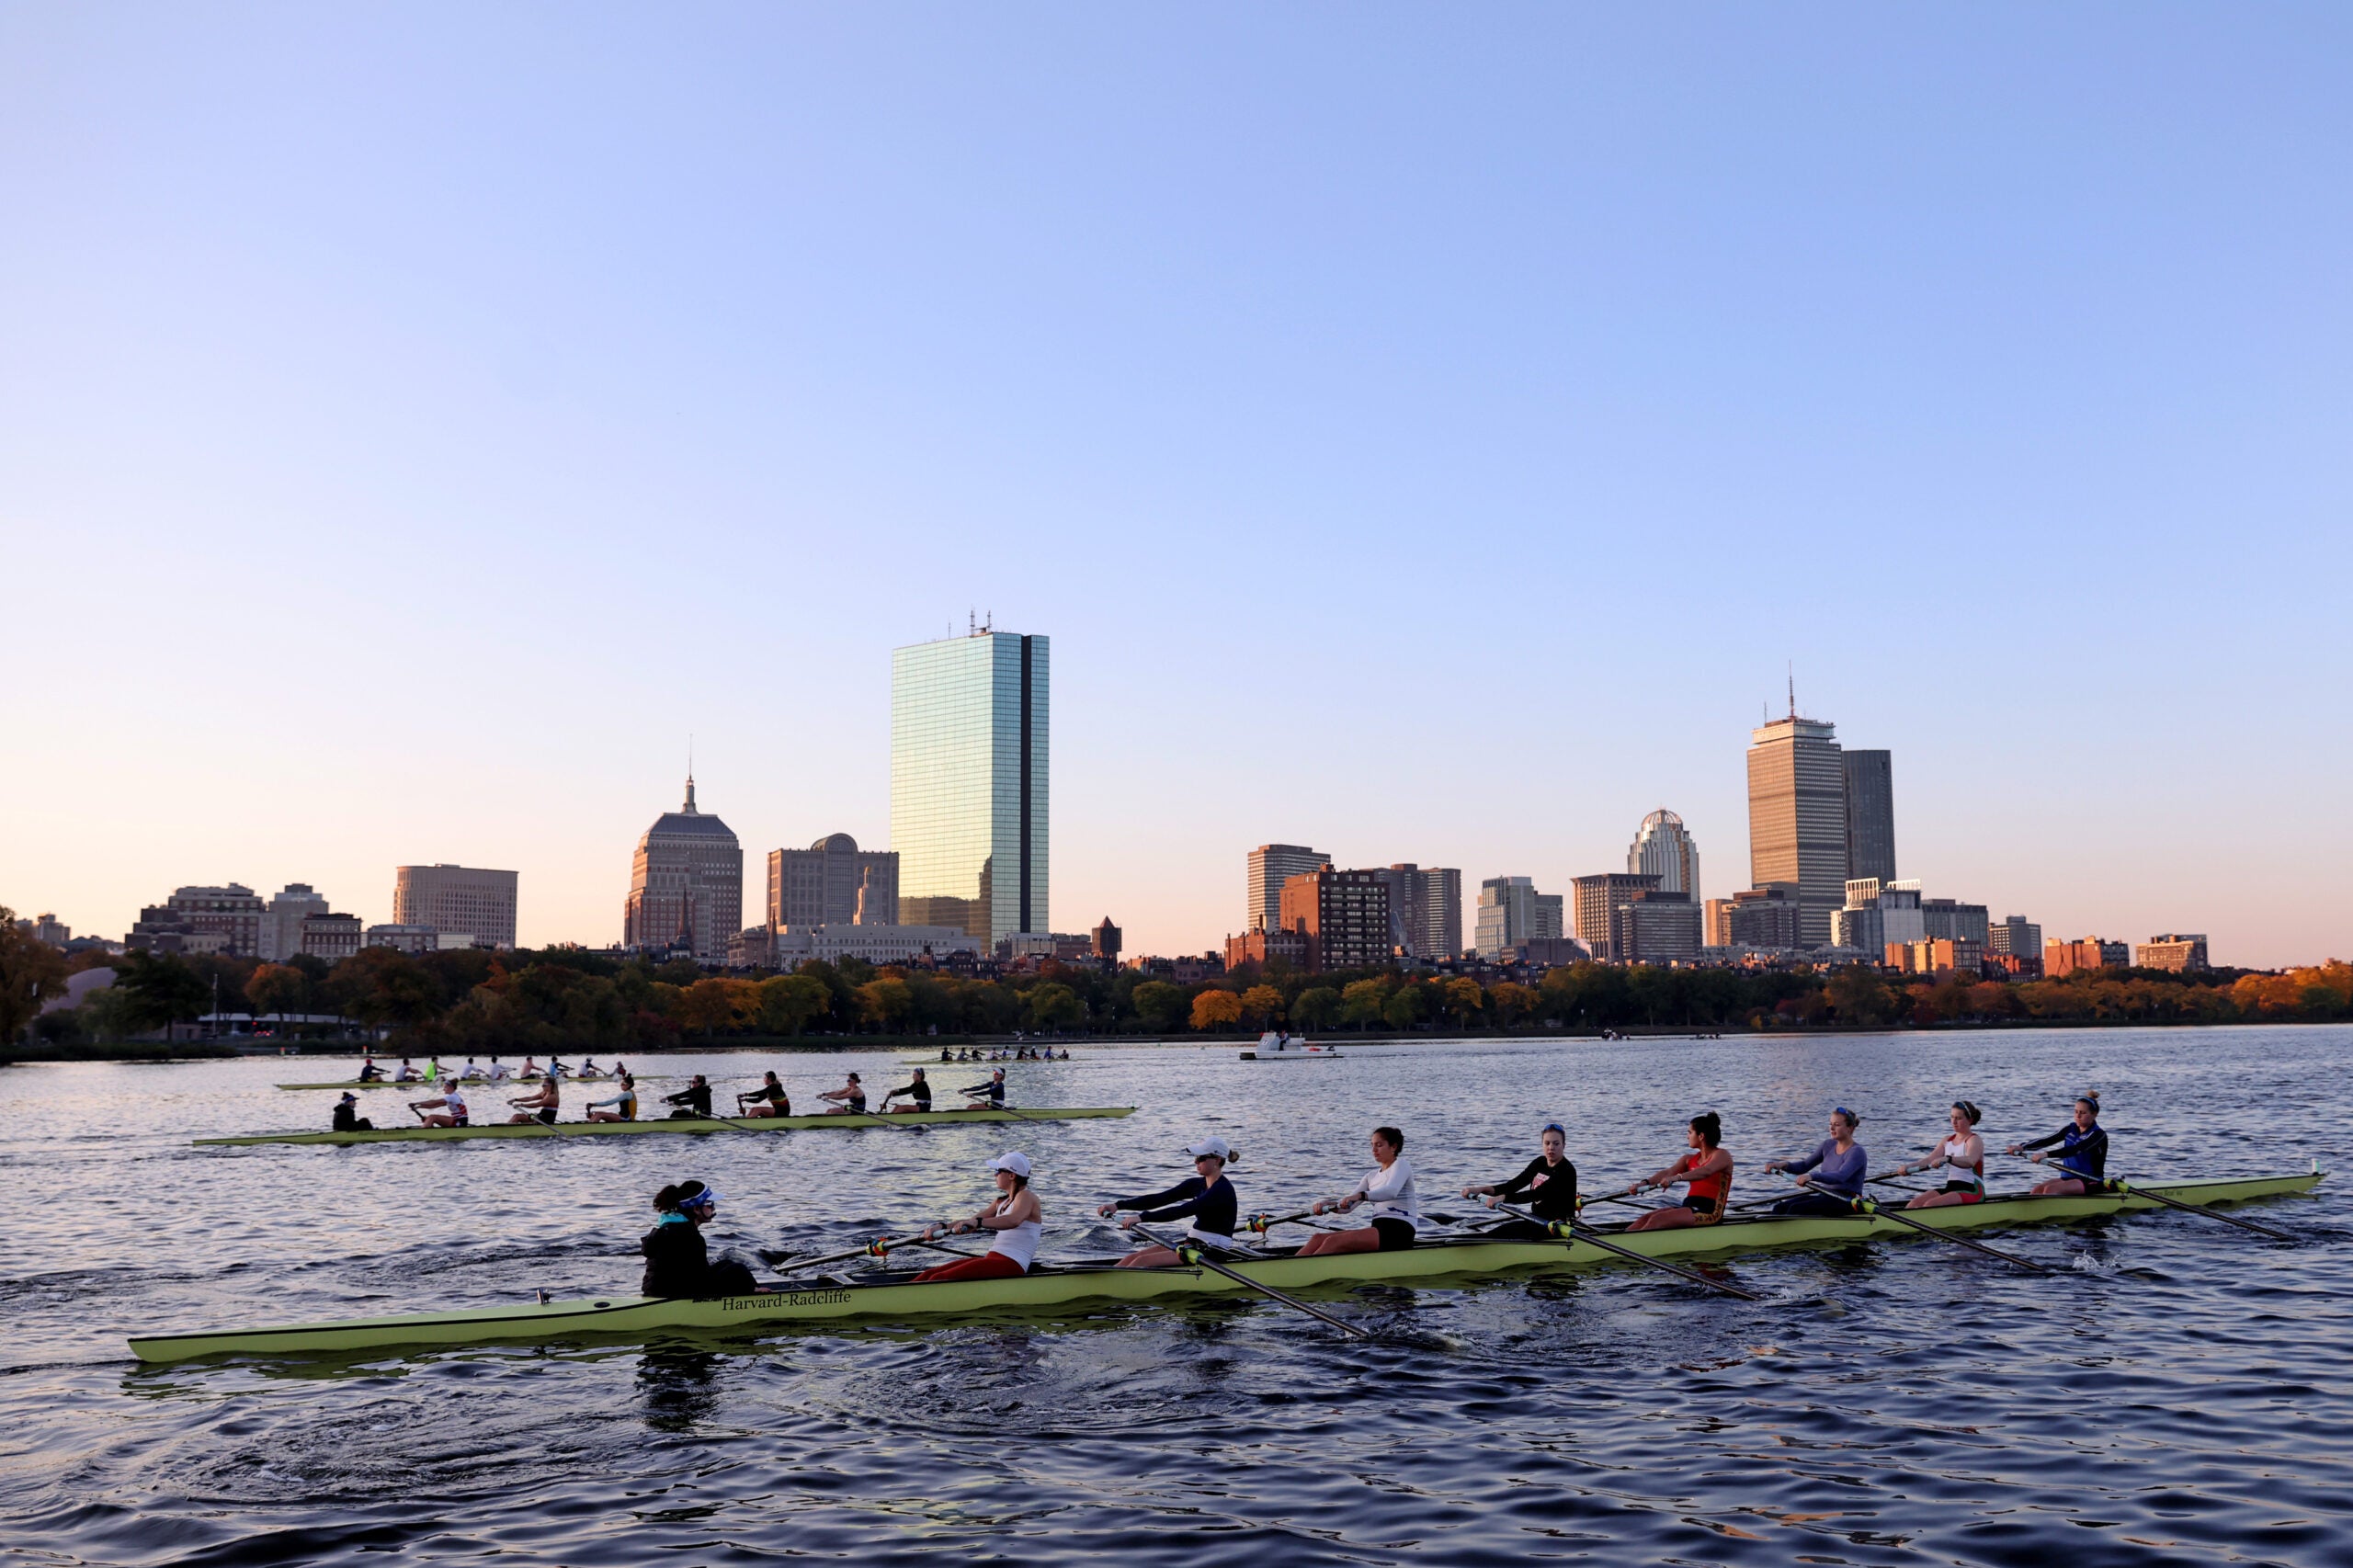 Watch the Head of the Charles